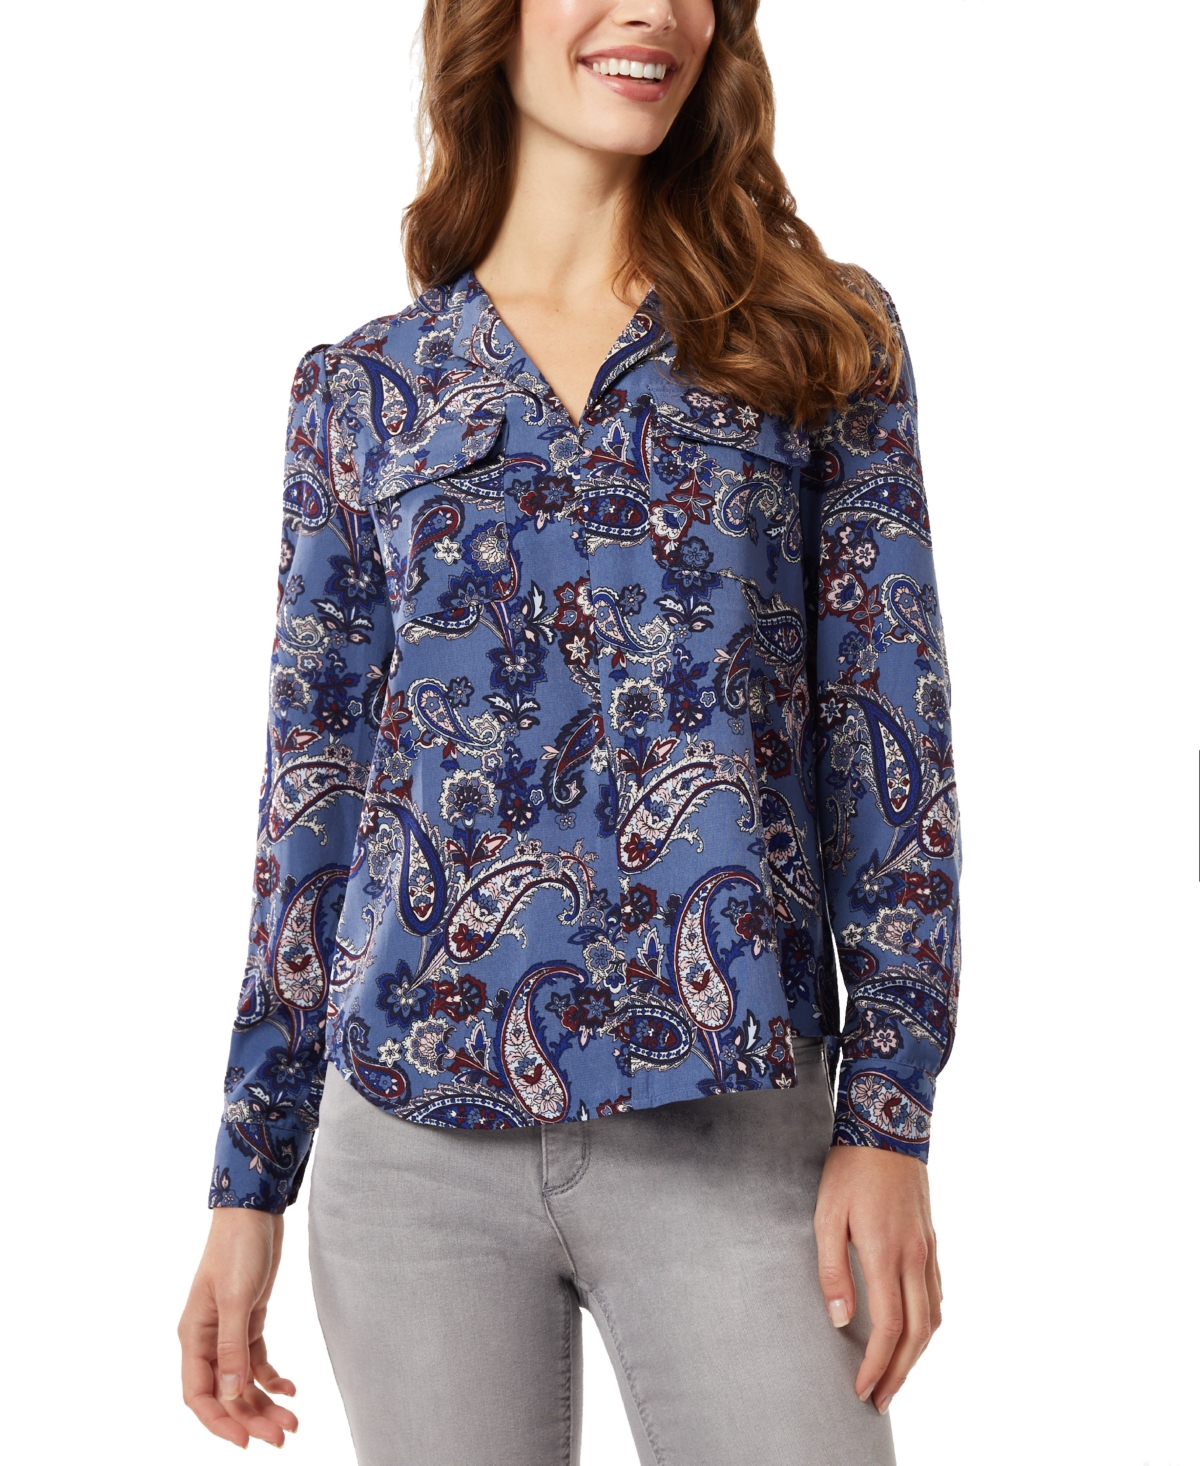 Women's Simplified Printed Utility Blouse - Mineral Blue Multi